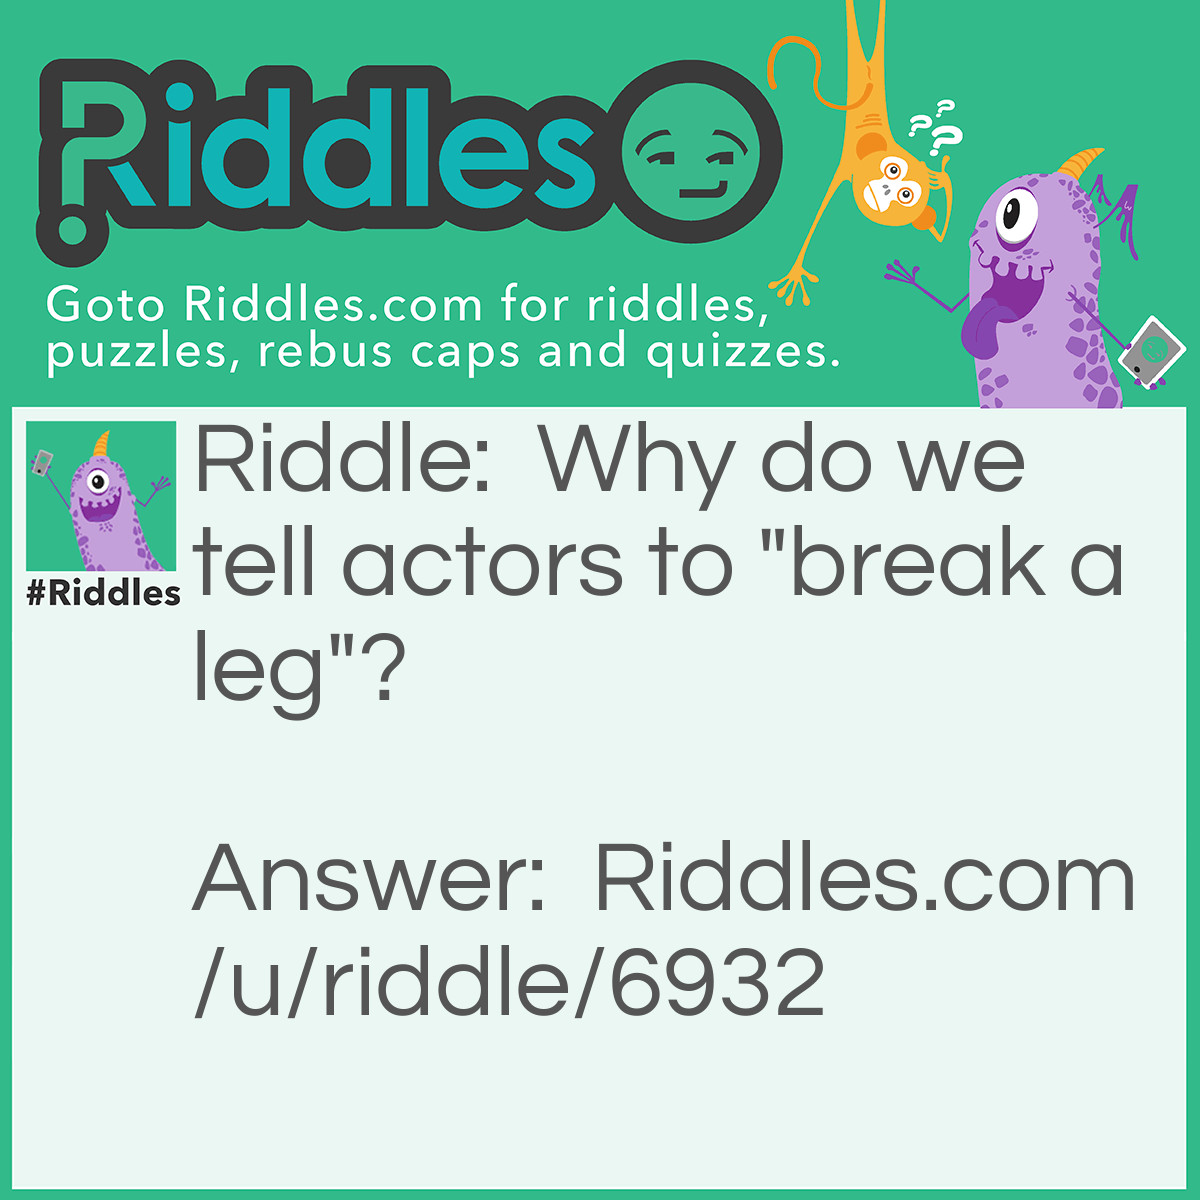 Riddle: Why do we tell actors to "break a leg"? Answer: Because every play has a "cast".